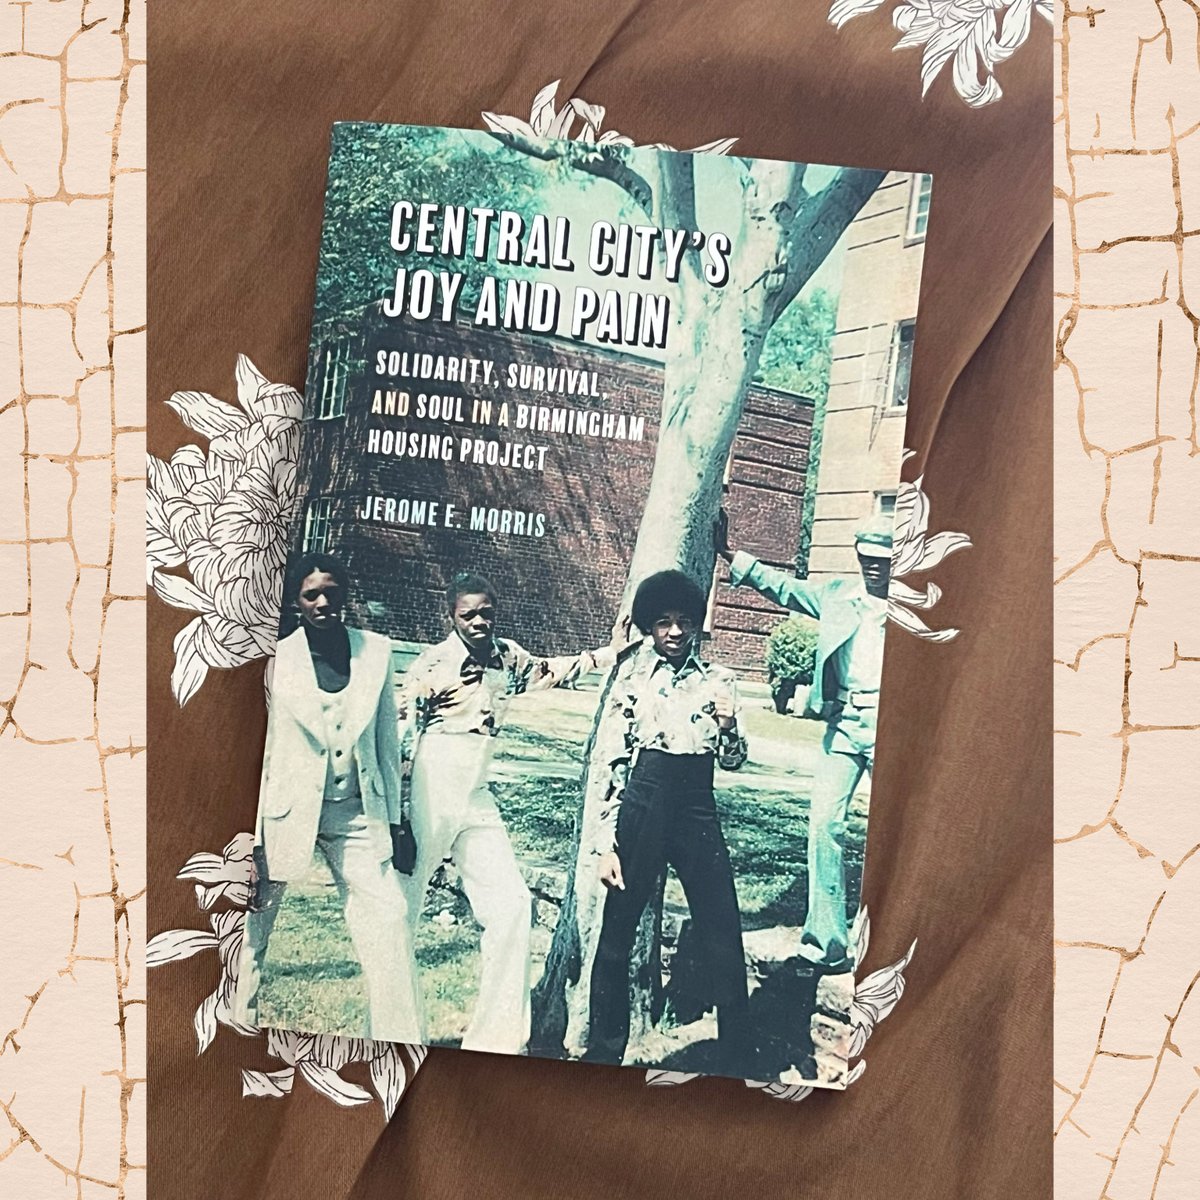 📸 Are you enjoying reading #CentralCitysJoyAndPain by @DrJeromeMorris? We would love to see! Show us with pics of you & the book using #CentralCitySelfie and/or tag us. Tell us your favorite part! 

#CentralCitysJoyAndPain #BlackAuthor #BlackStories #BlackHistoryMonth #TBRList